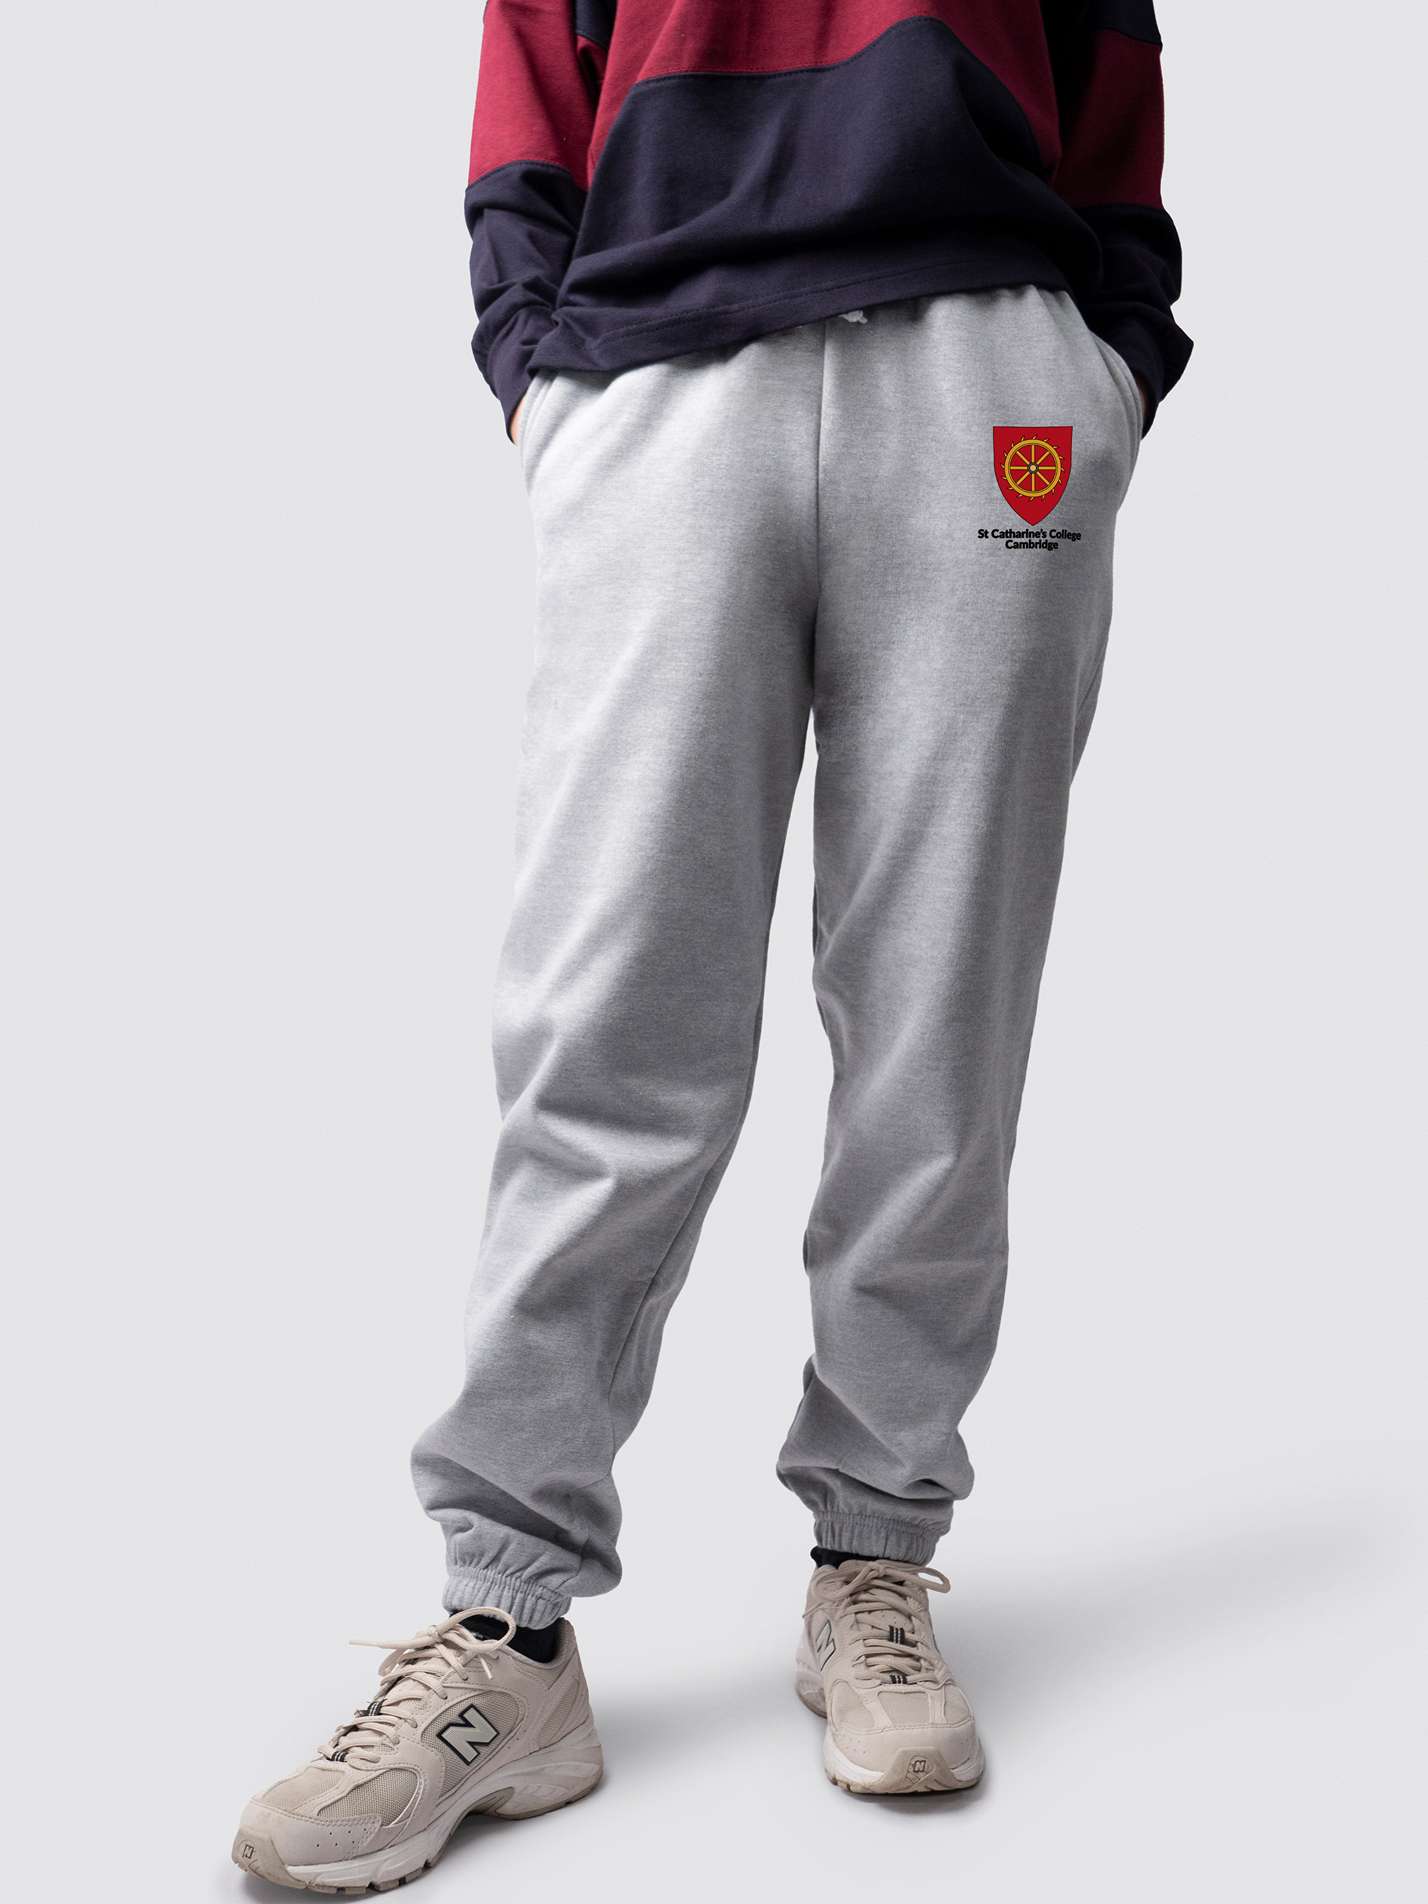 undergraduate cuffed sweatpants, made from soft cotton fabric, with St Catharine's logo